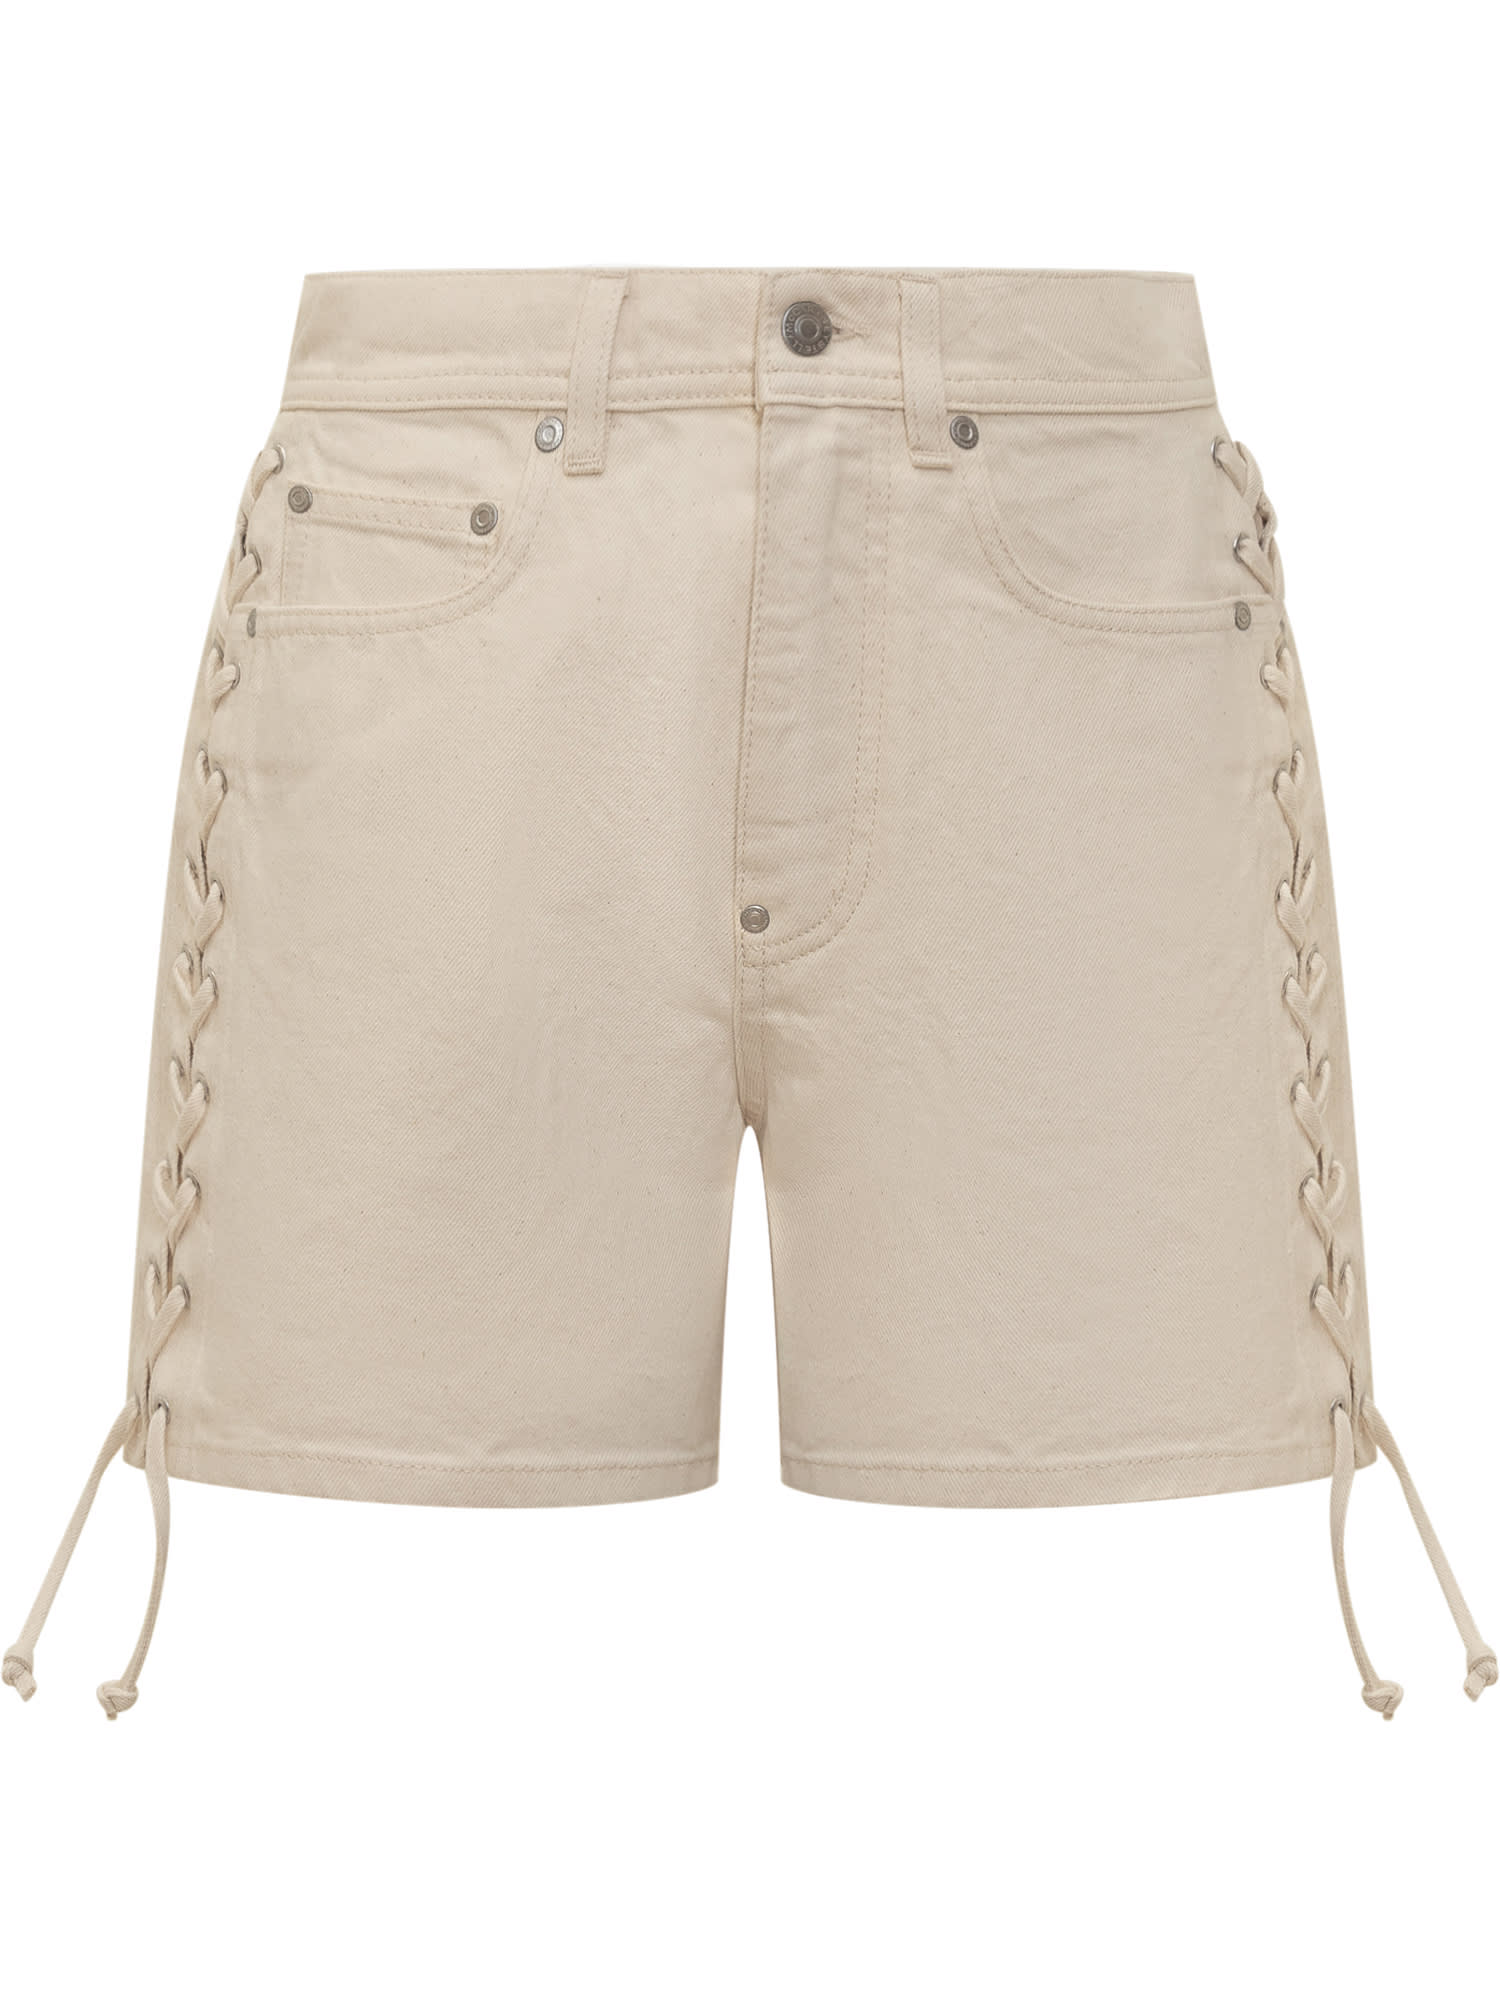 Shorts With Braided Ties